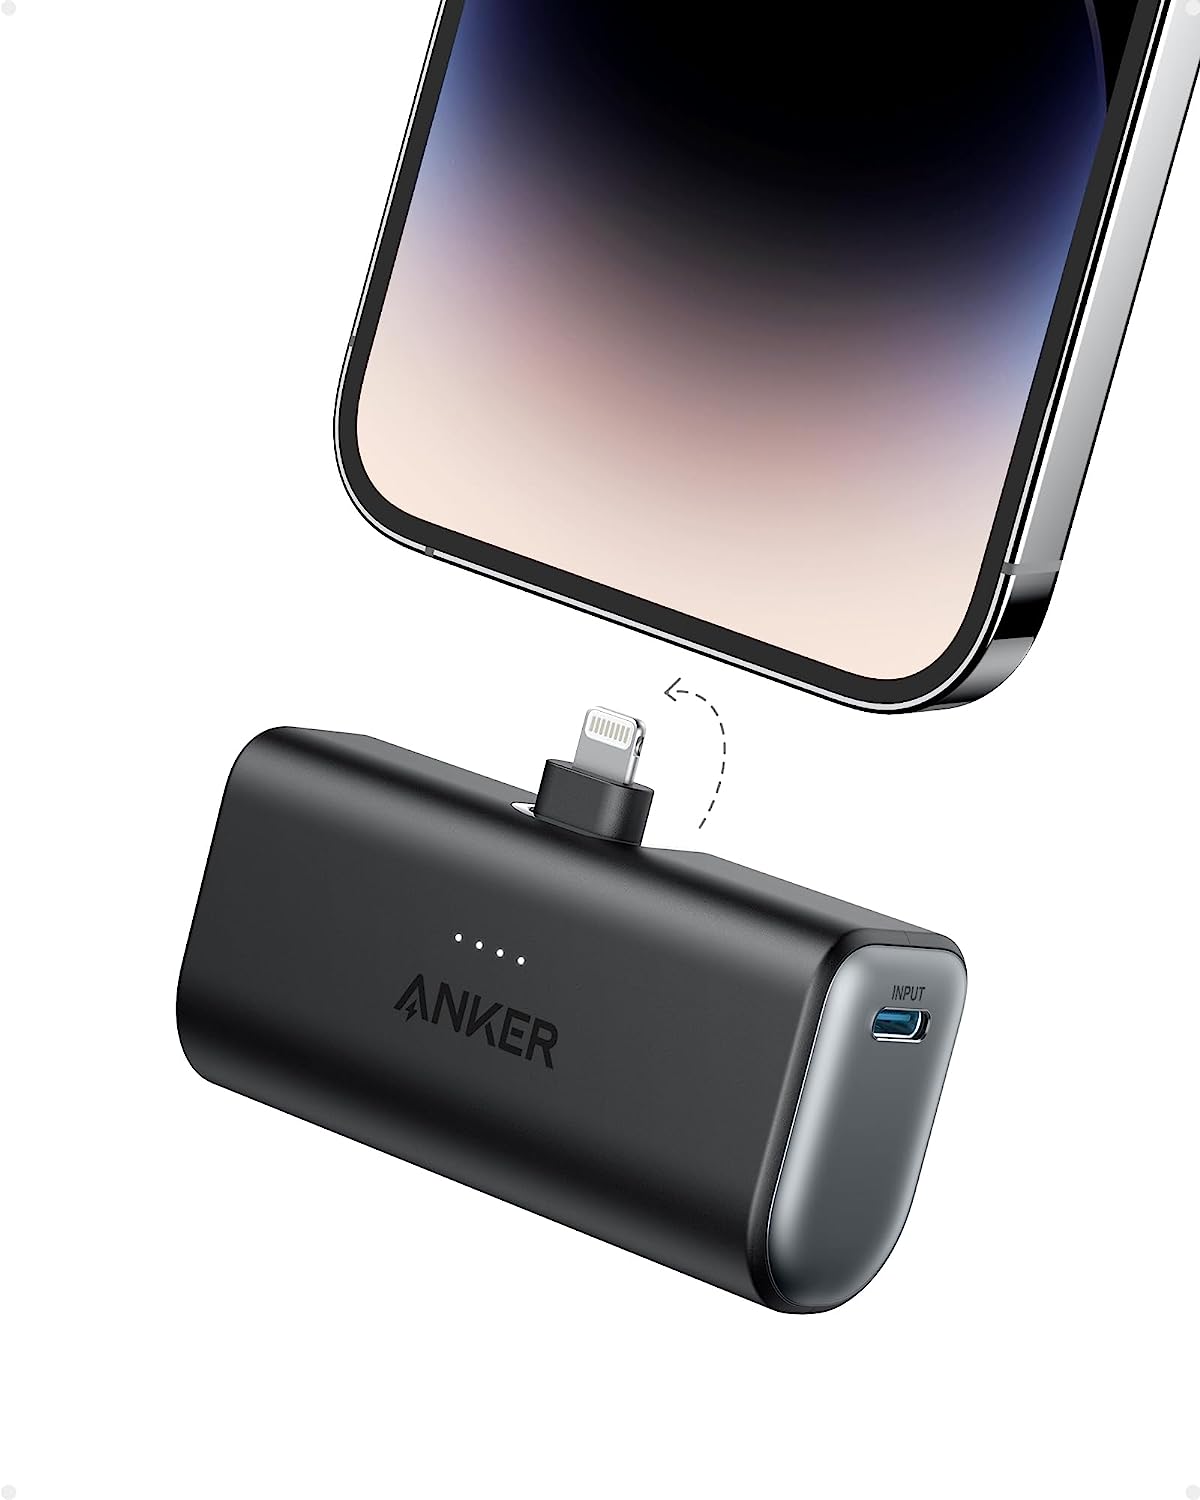 Anker 621 Power Bank / Charger for iPhone / Built-In Lightning 12W - Black